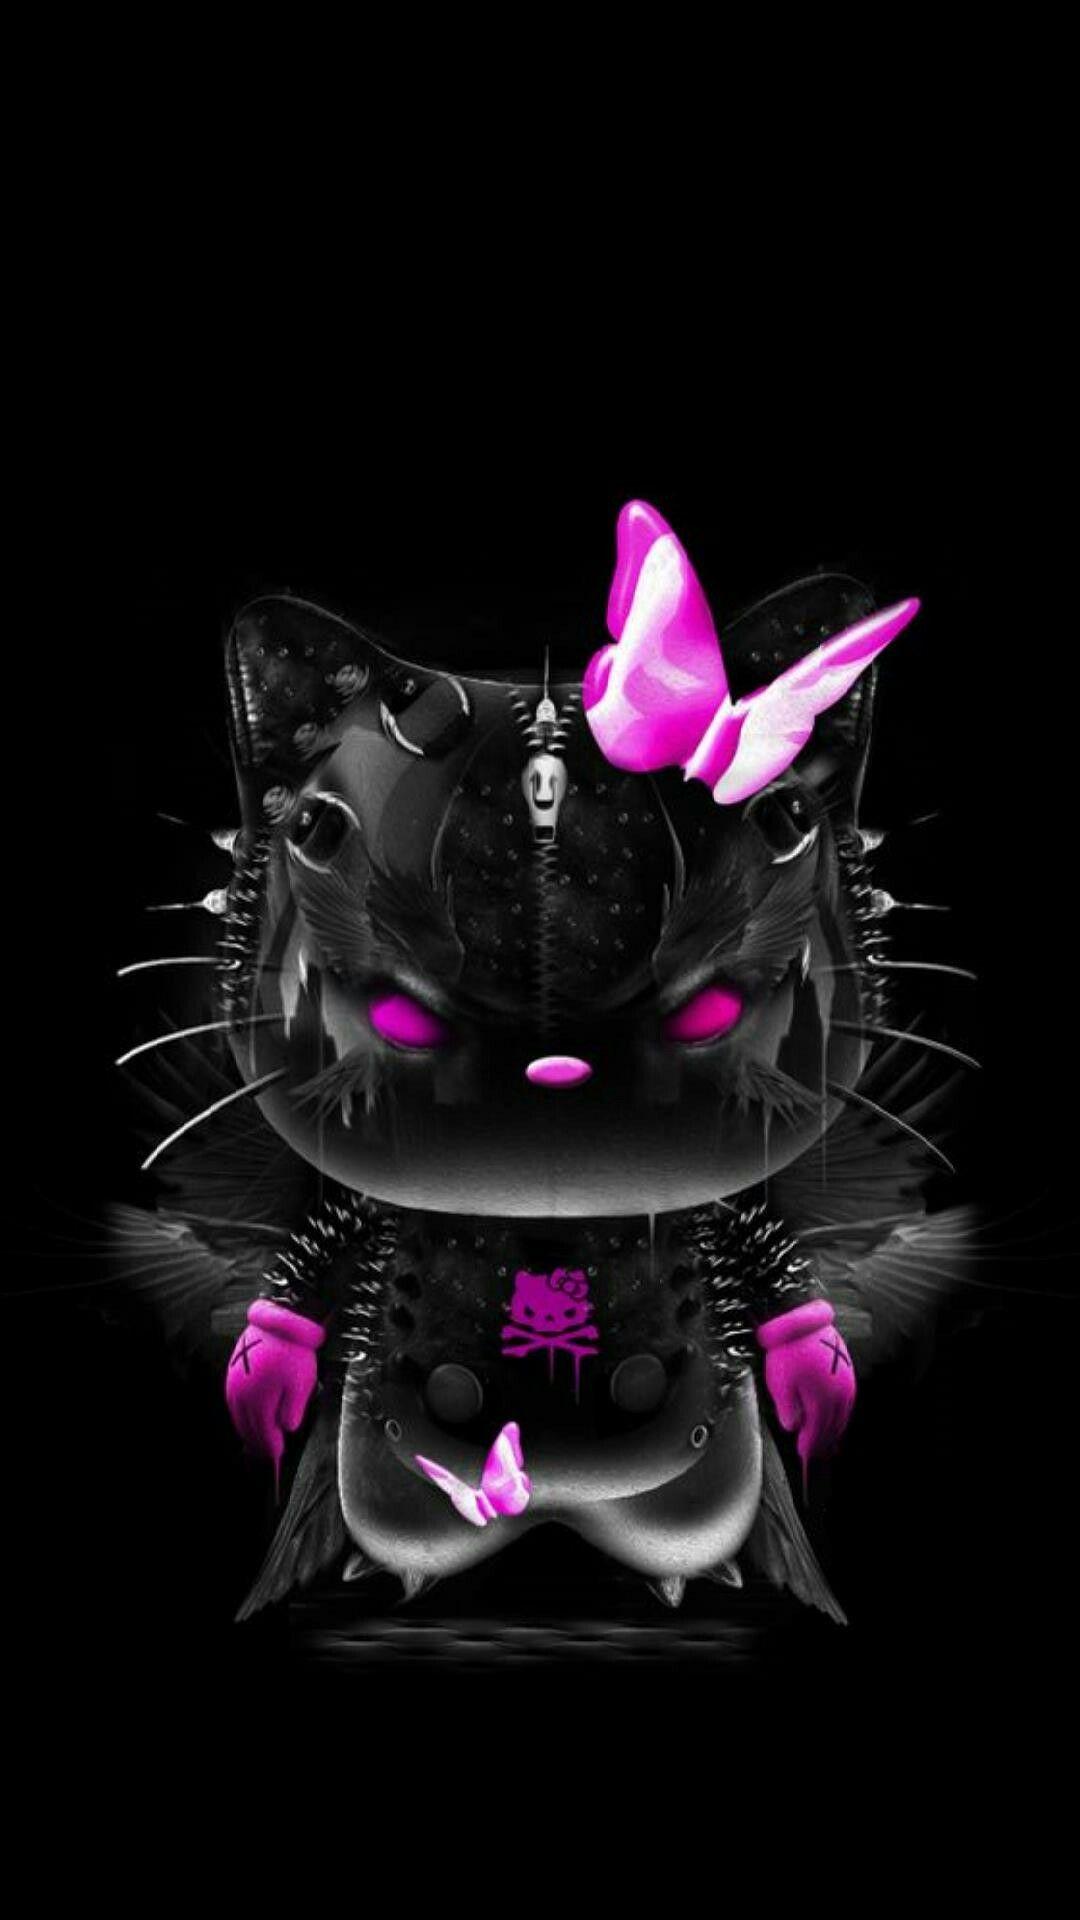 Hello Kitty Wallpaper Black And Pink. (63++ Wallpaper)